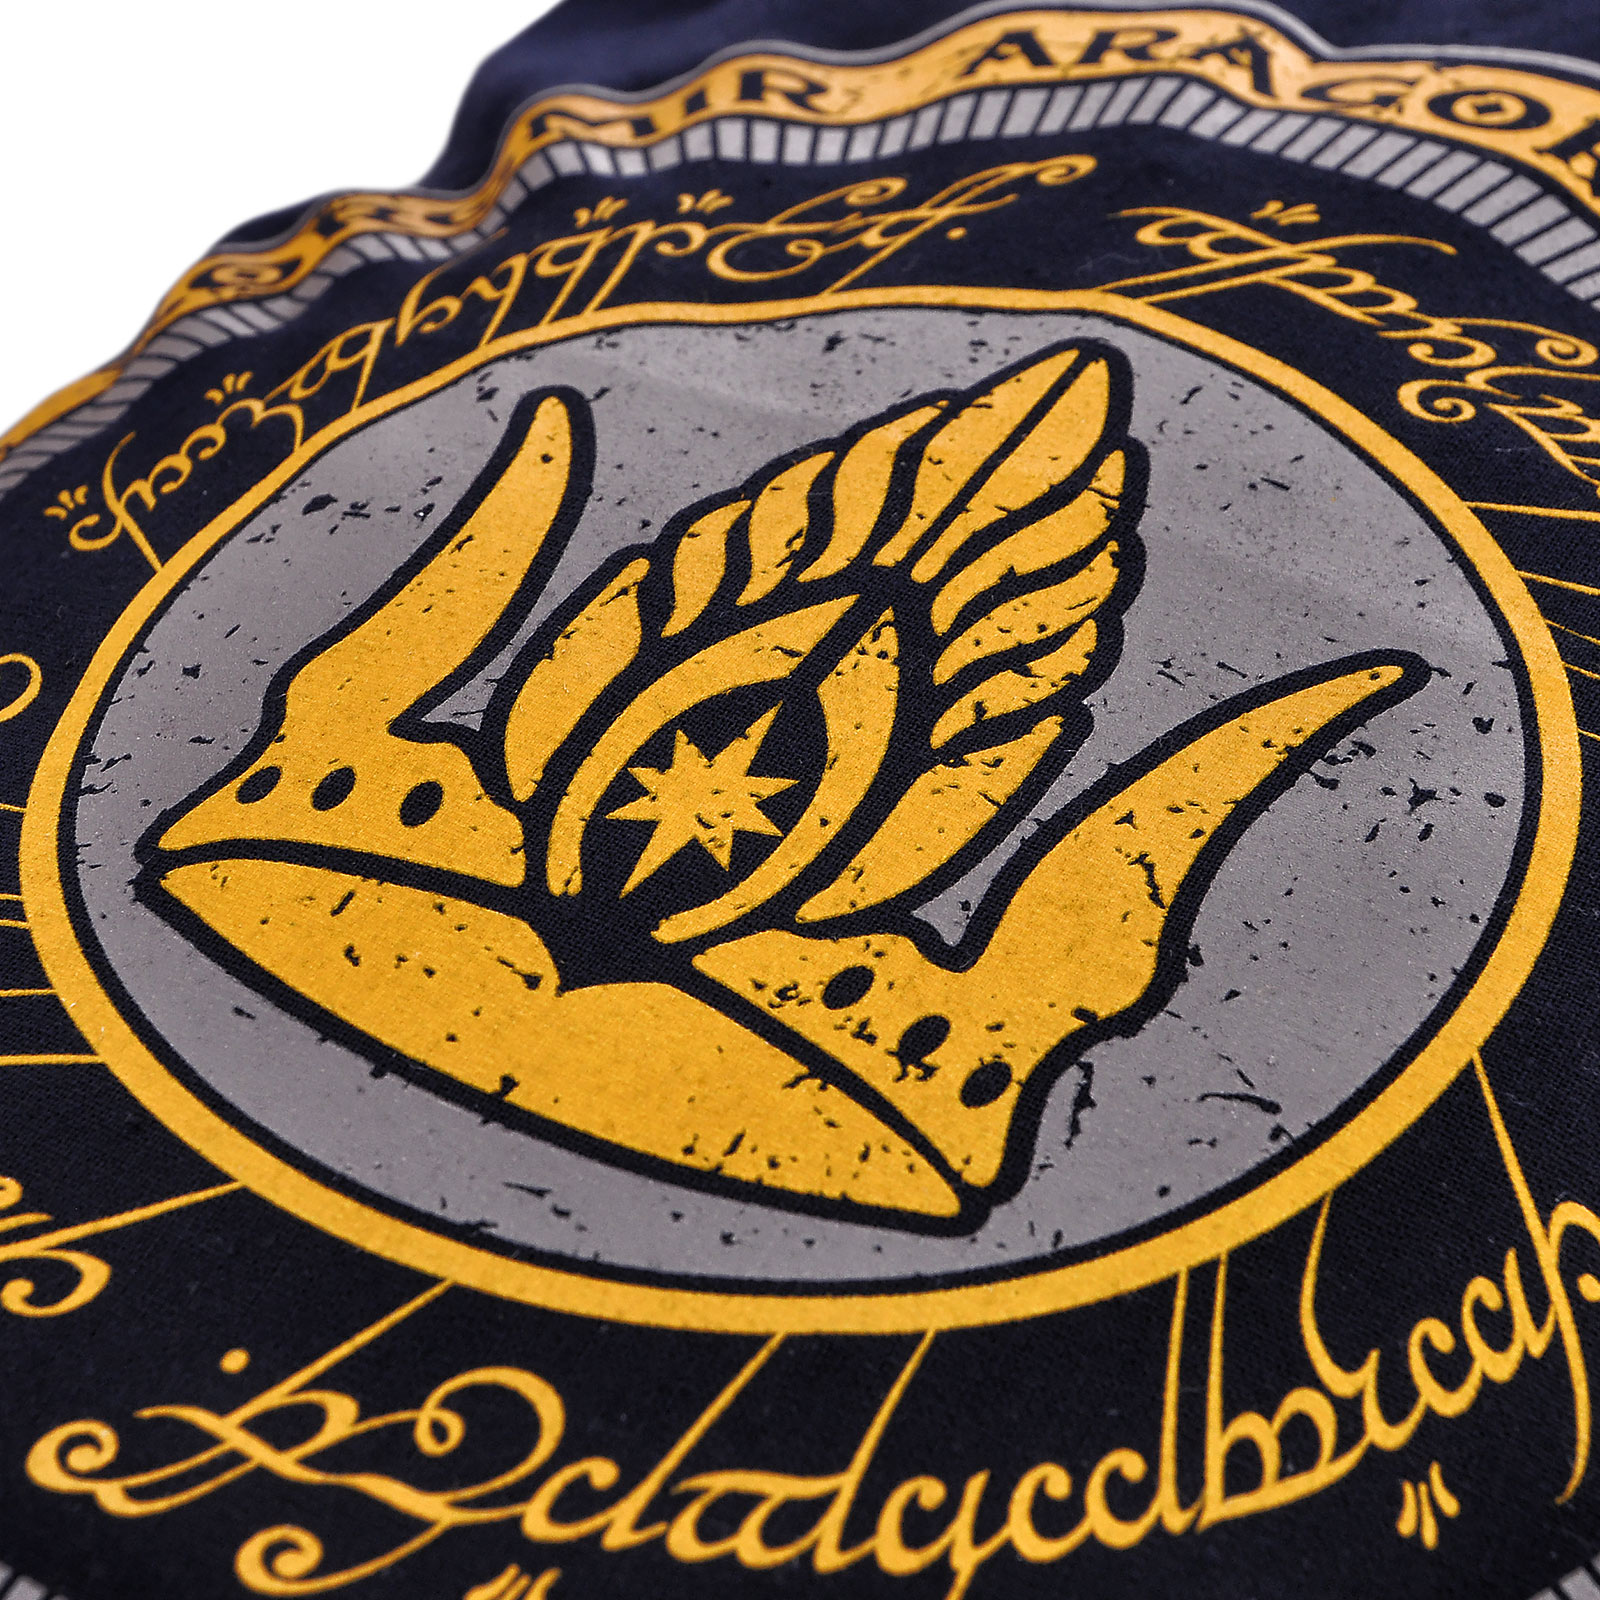 Lord of the Rings - Together for Gondor Sportbag